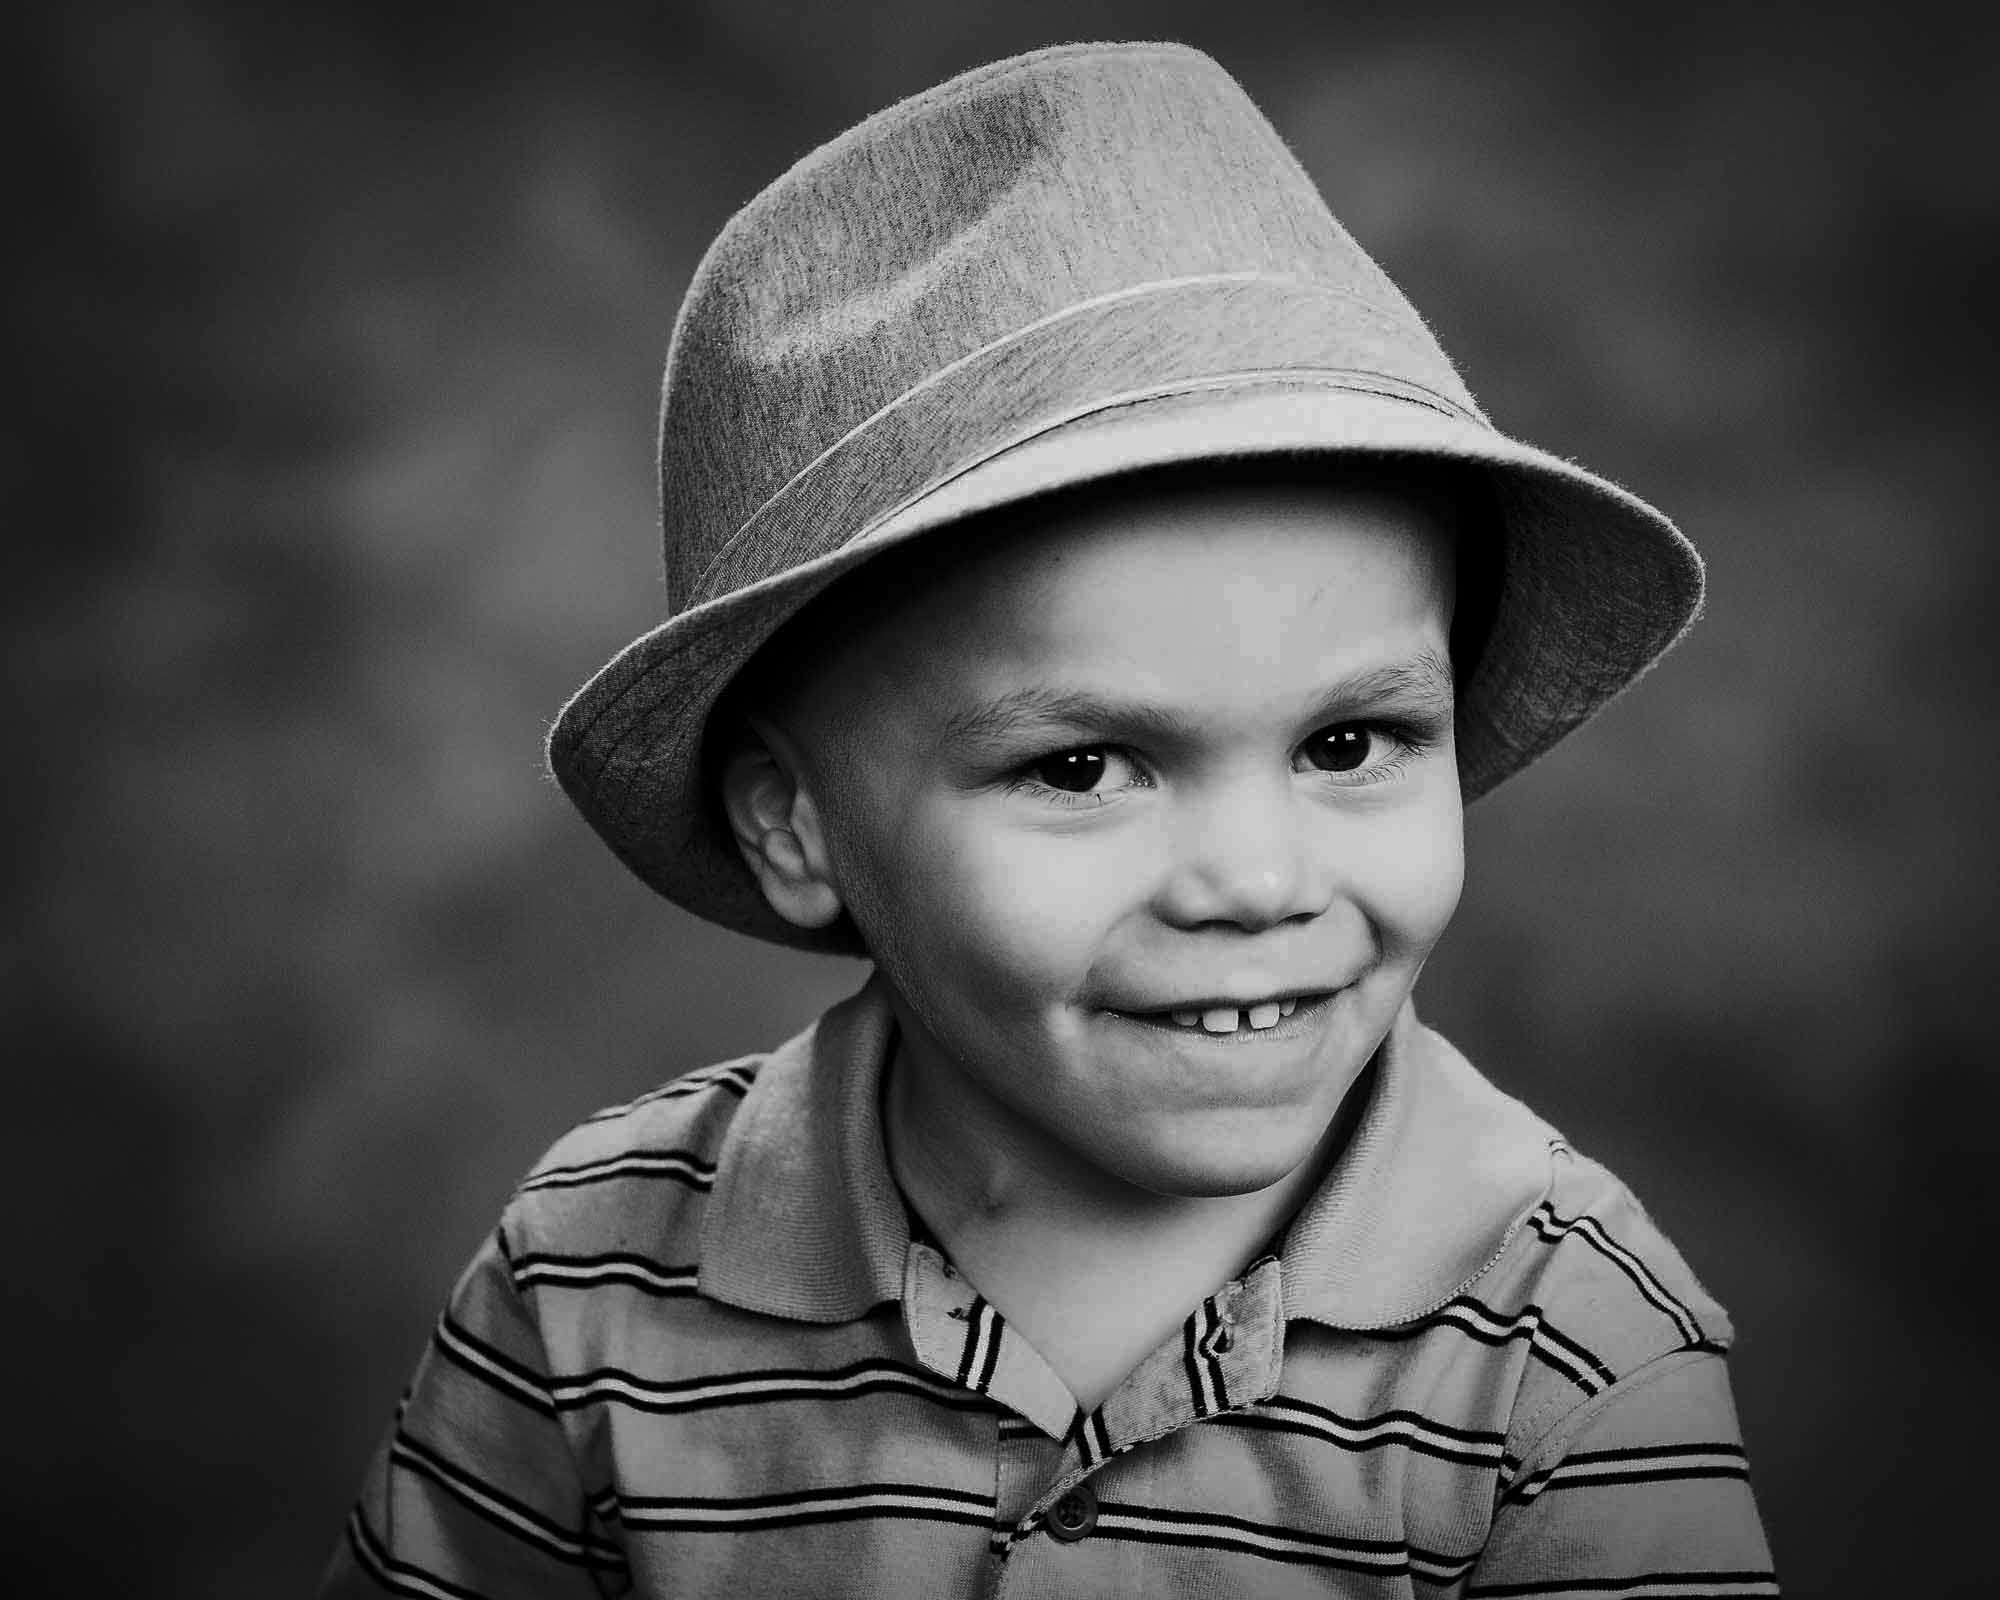 Commercial Portrait Photography: Flashes of Hope-Philadelphia: Zave Smith